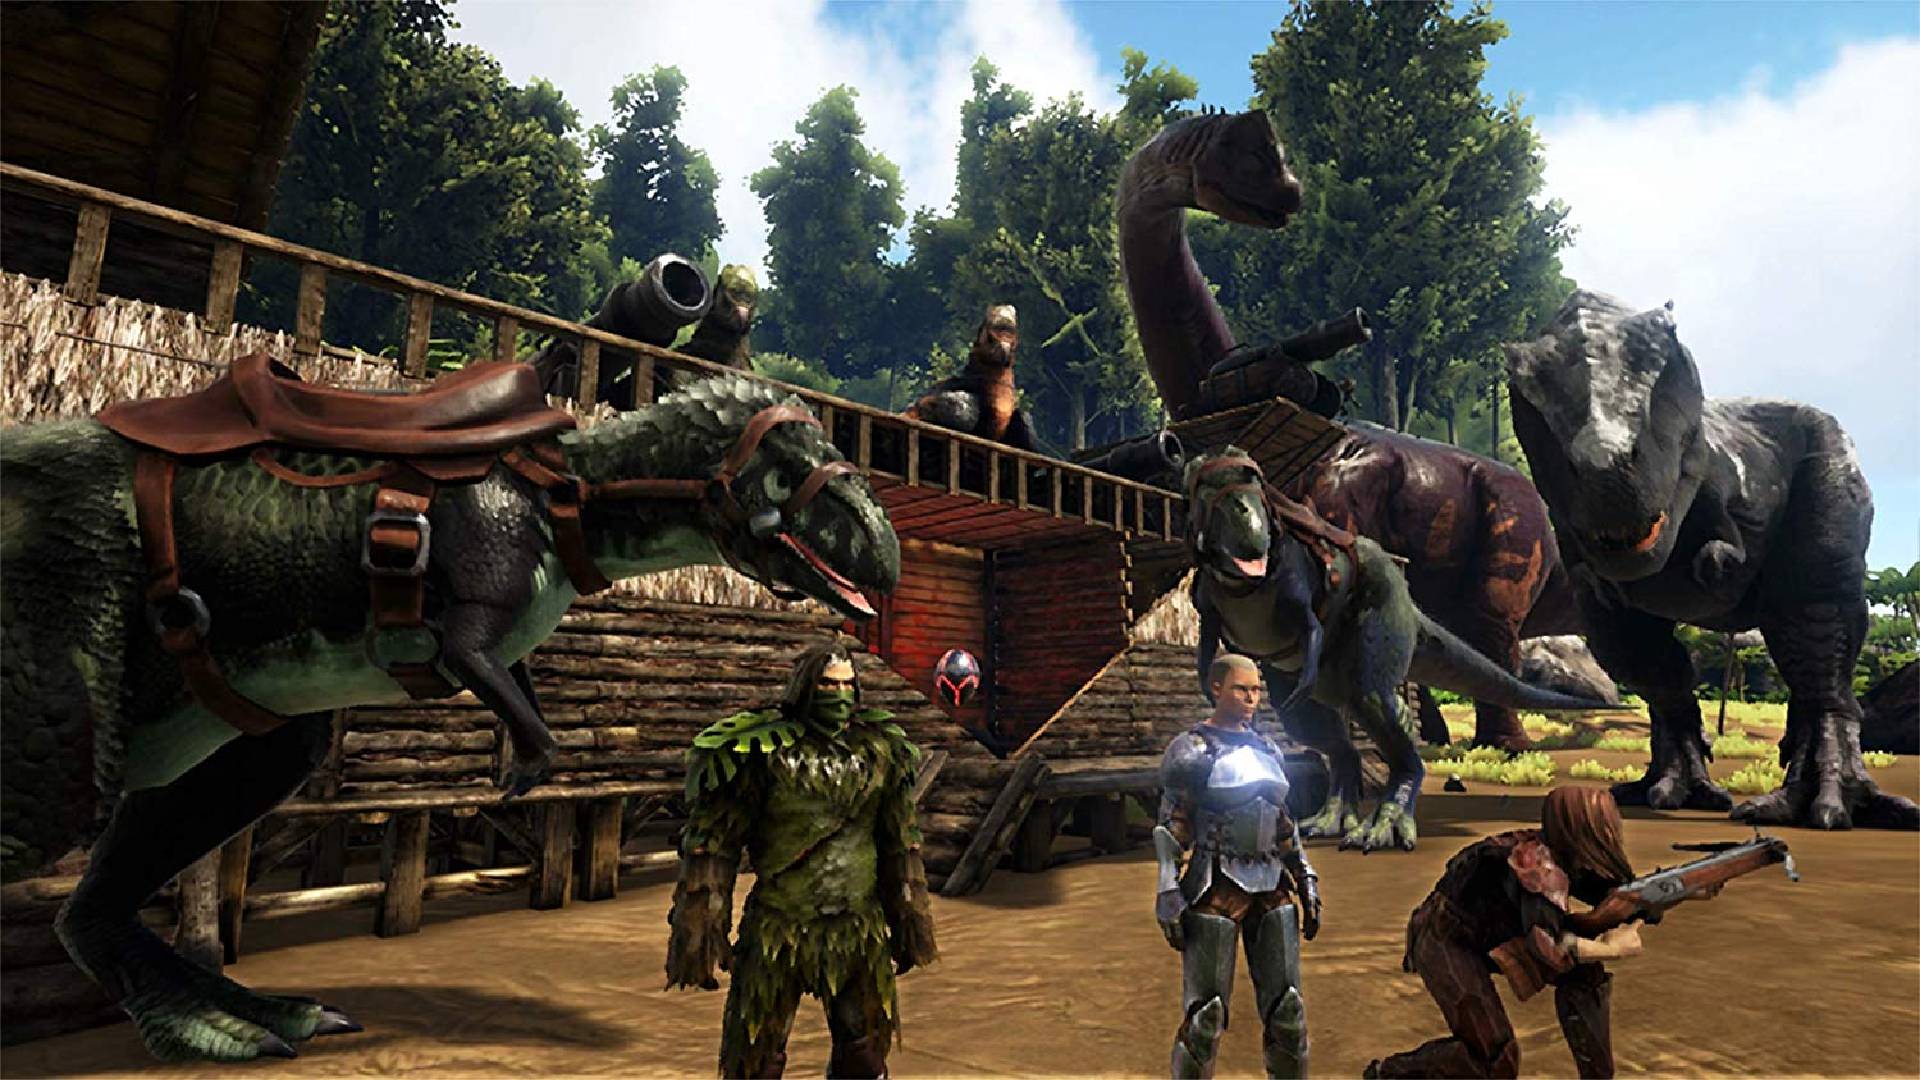 Dinosaur Games; Survival Games on the App Store